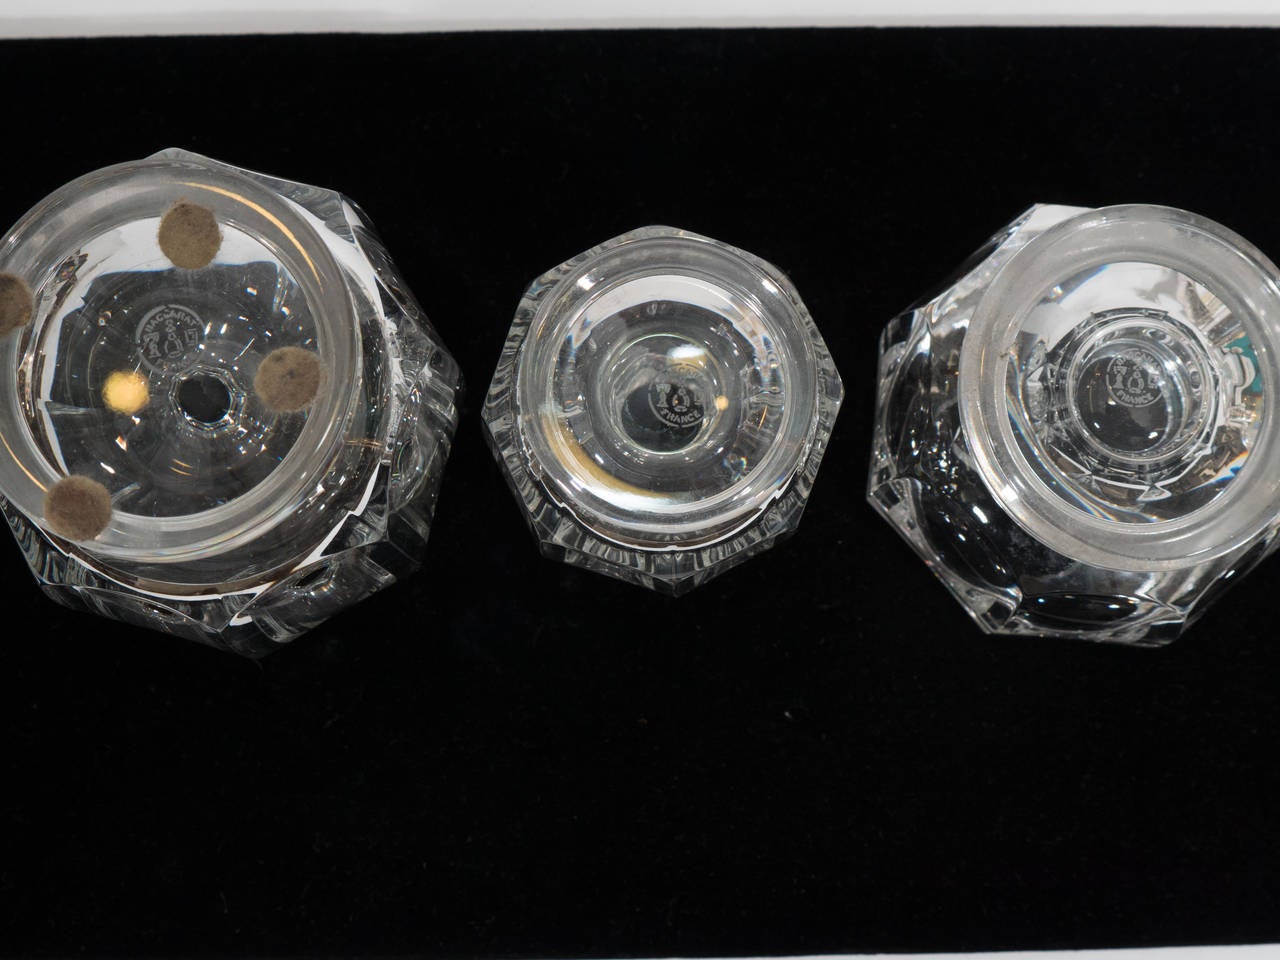 A dresser set consisting of three different size Baccarat clear glass cologne bottles. Marked Baccarat France on the bottom.

Good vintage condition with age appropriate wear.

Measures: Large: 7